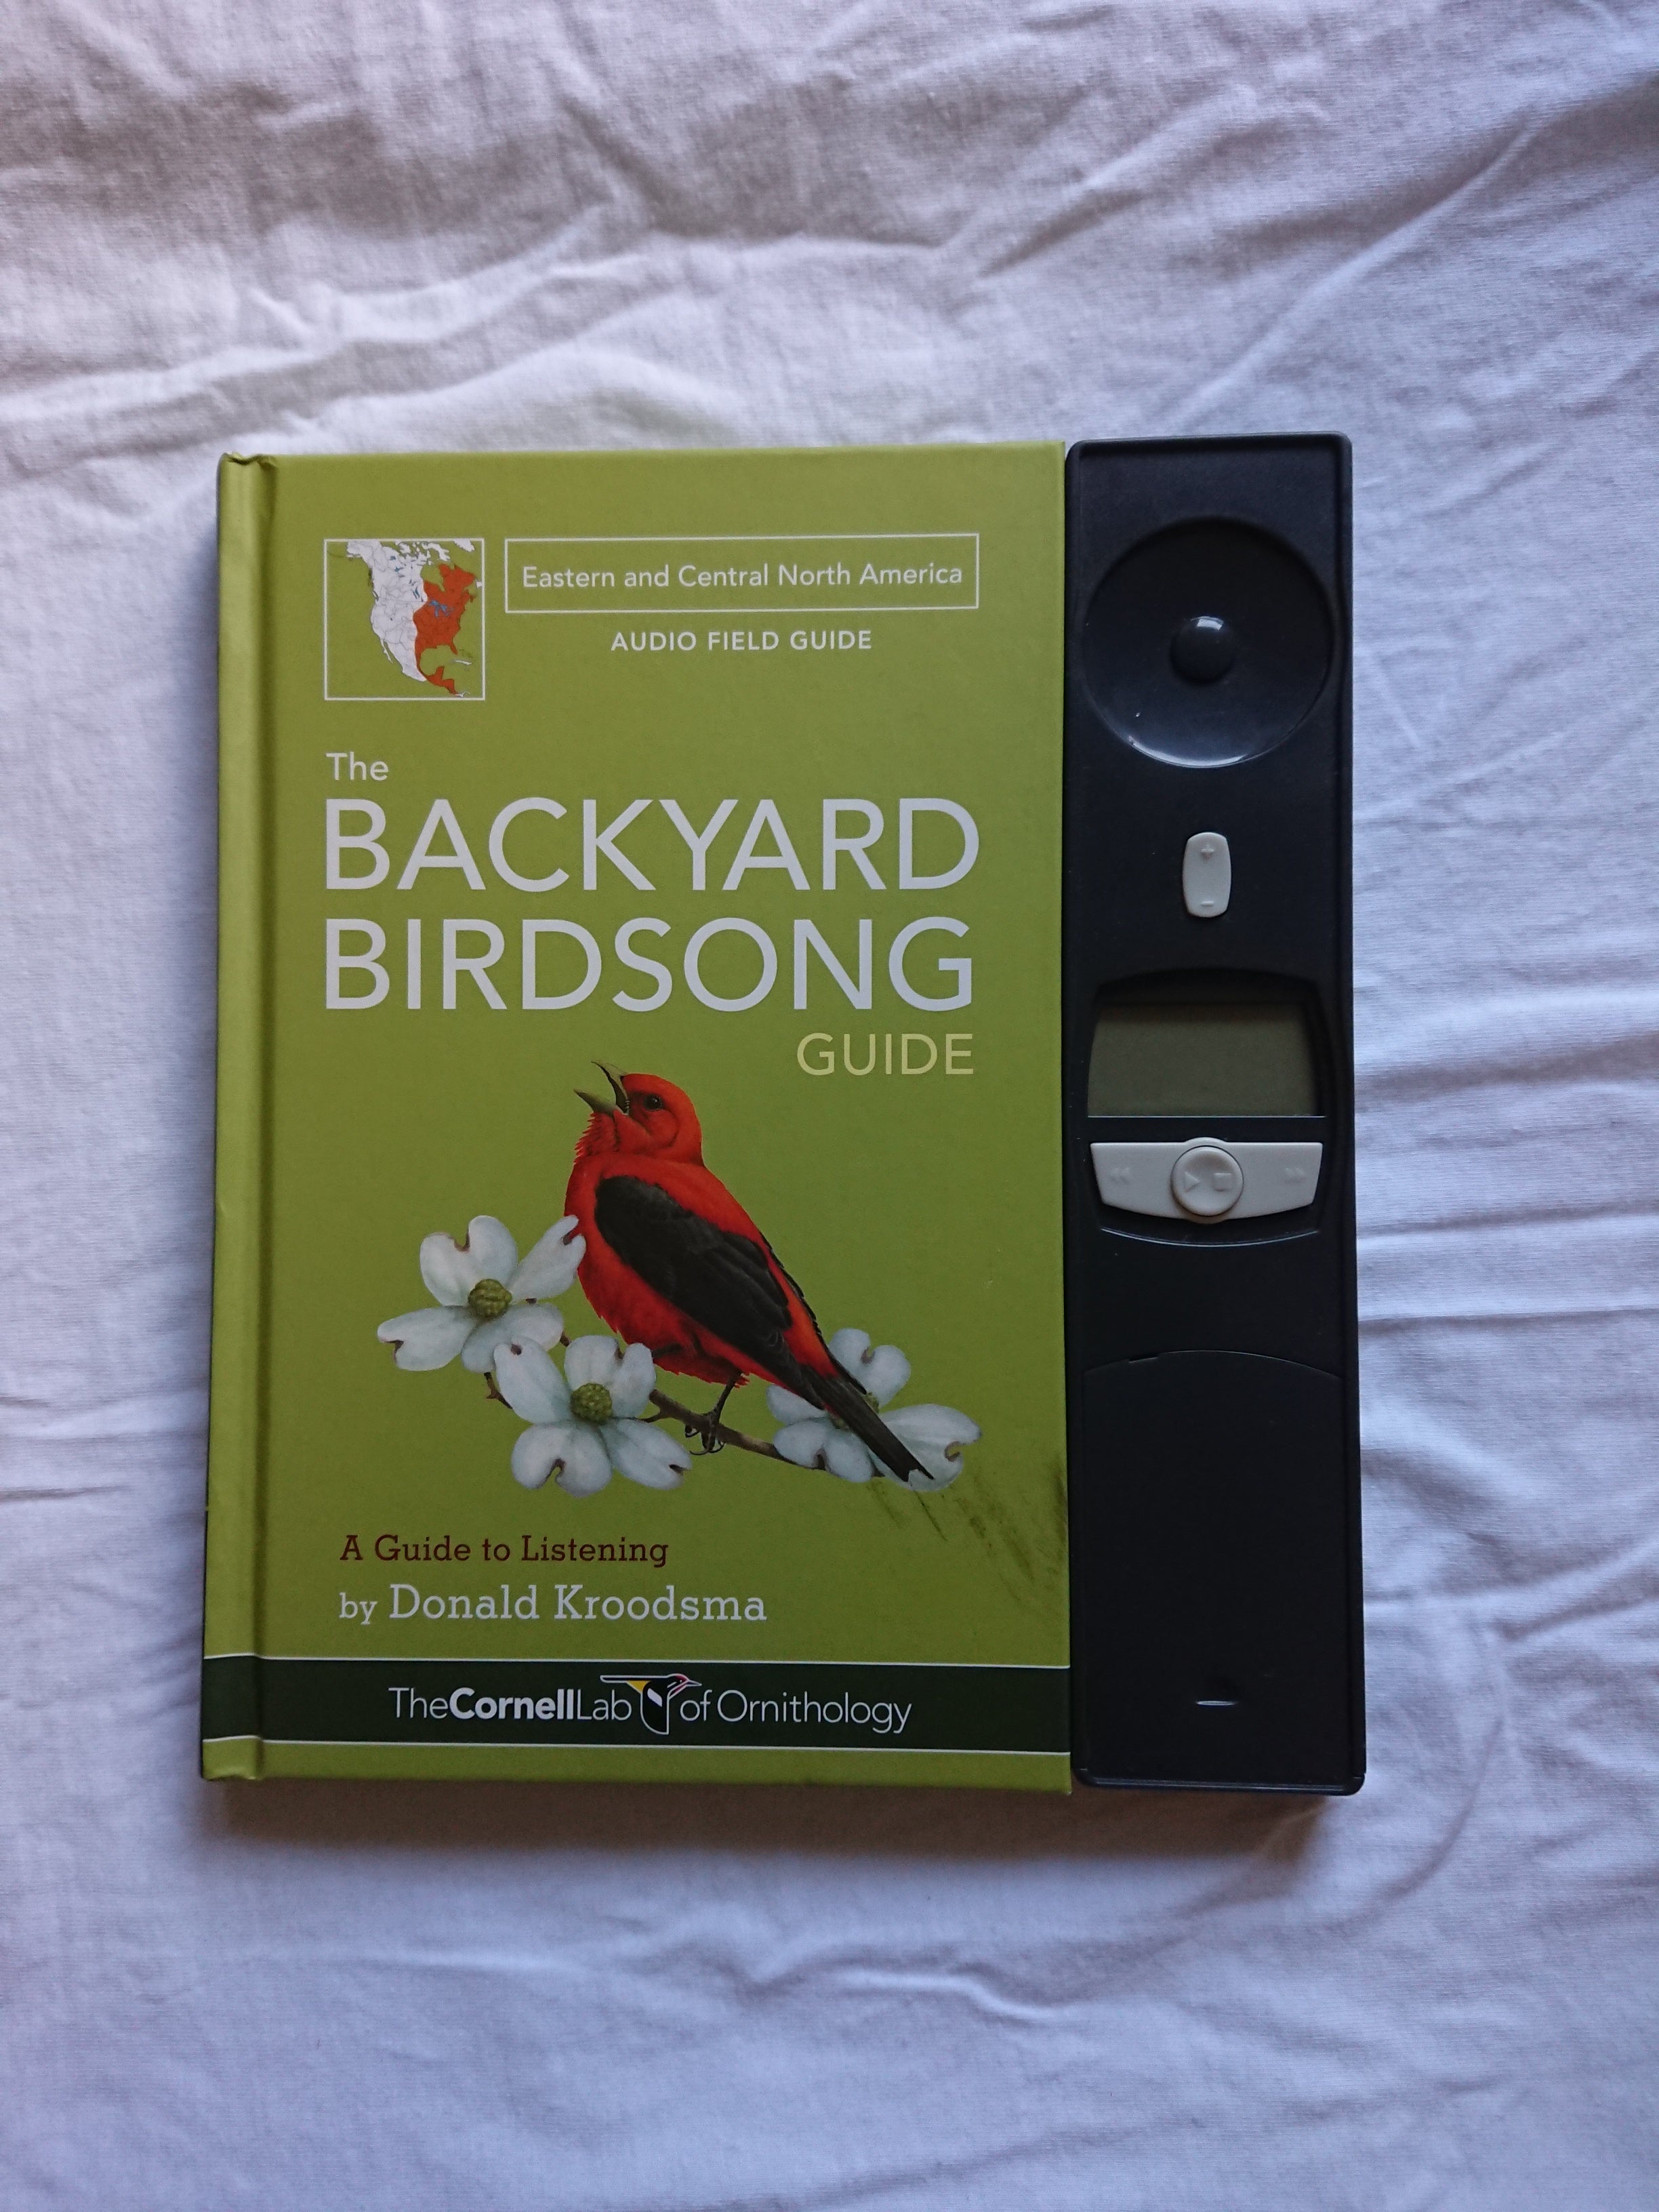 America　Pangobooks　by　The　and　Hardcover　Central　Birdsong　Eastern　Kroodsma,　Backyard　Donald　Guide　North